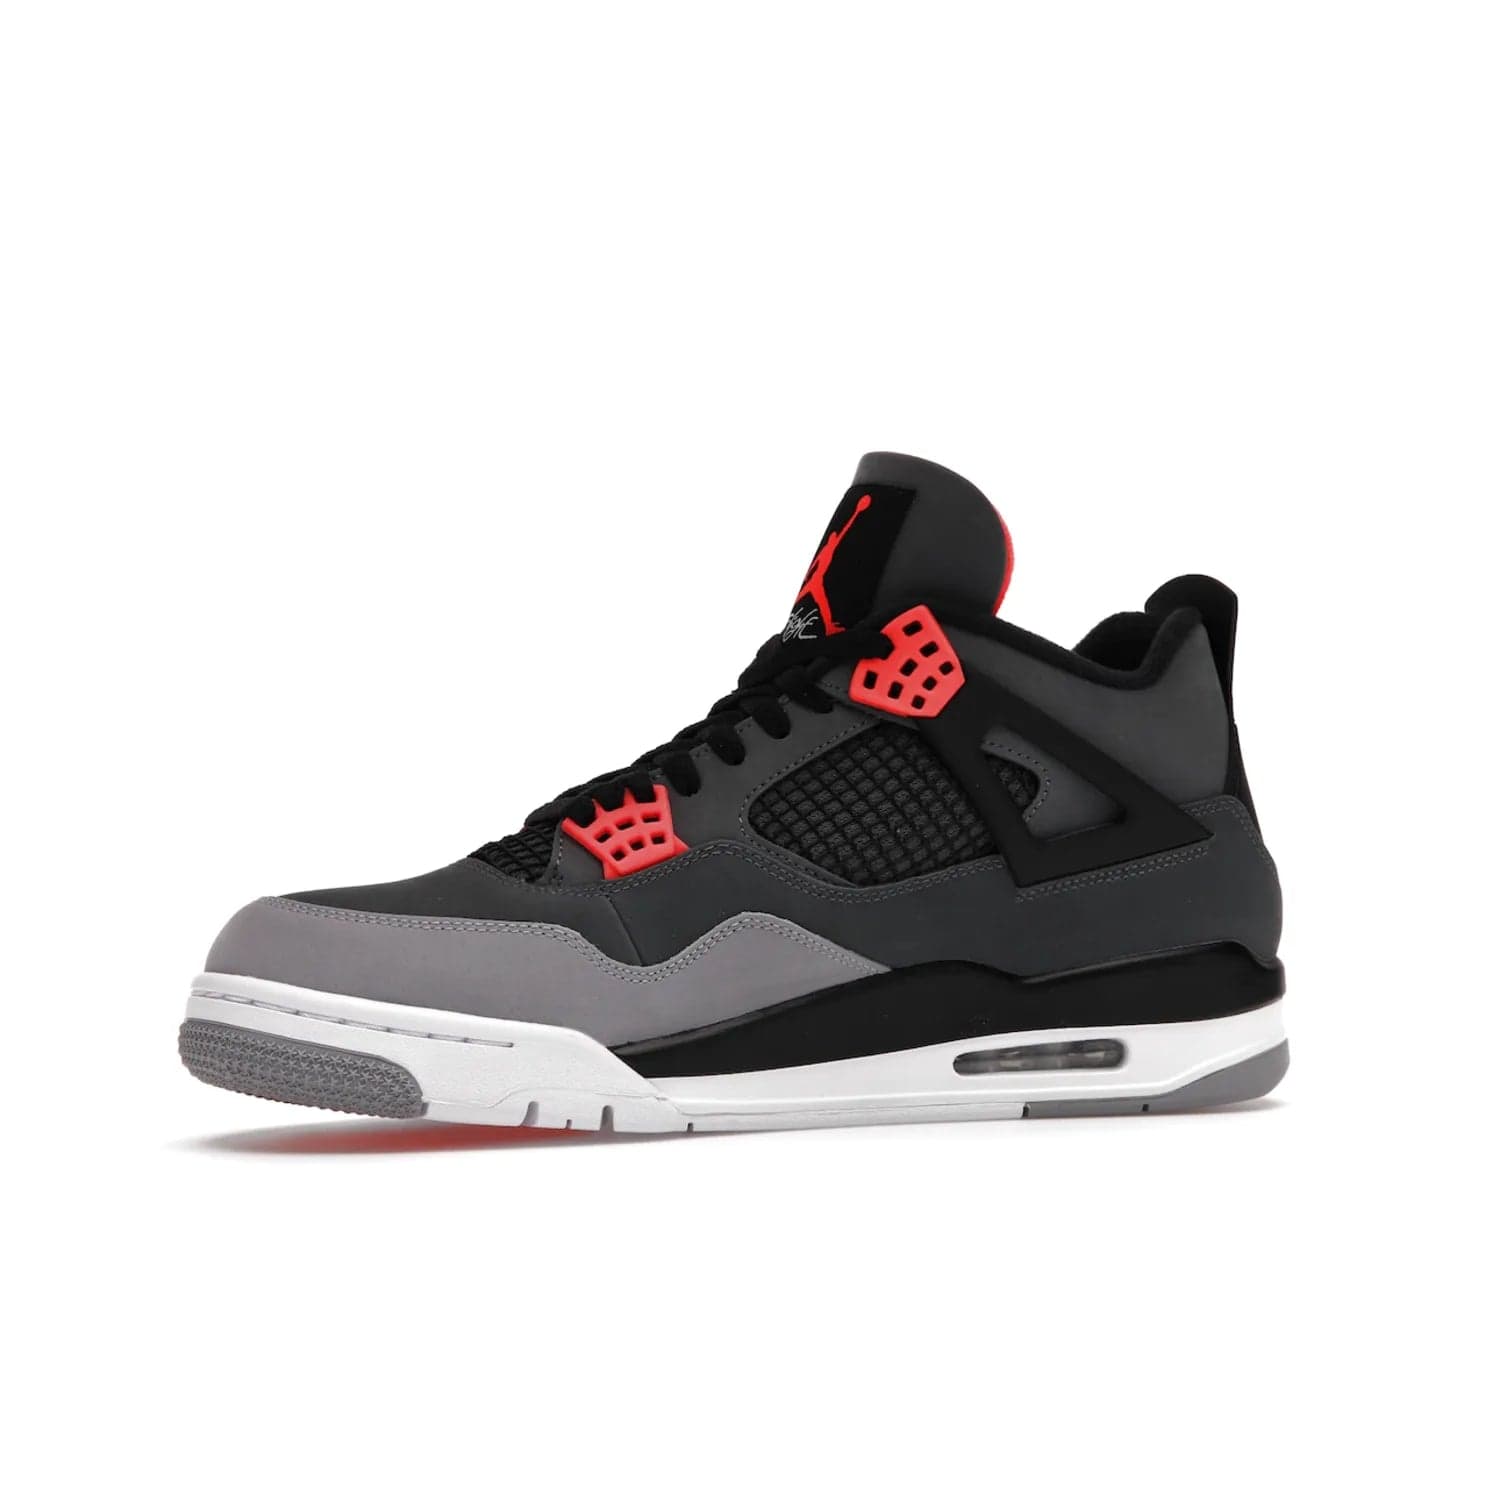 Jordan 4 Retro Infrared - Image 17 - Only at www.BallersClubKickz.com - Introducing the classic & timeless Air Jordan 4 Infrared. Durabuck upper, TPU mesh inserts, tech straps & heel tabs in dark grey and infrared accents. White sole with visible Air units. Out June 15, 2022. Get your pair now!